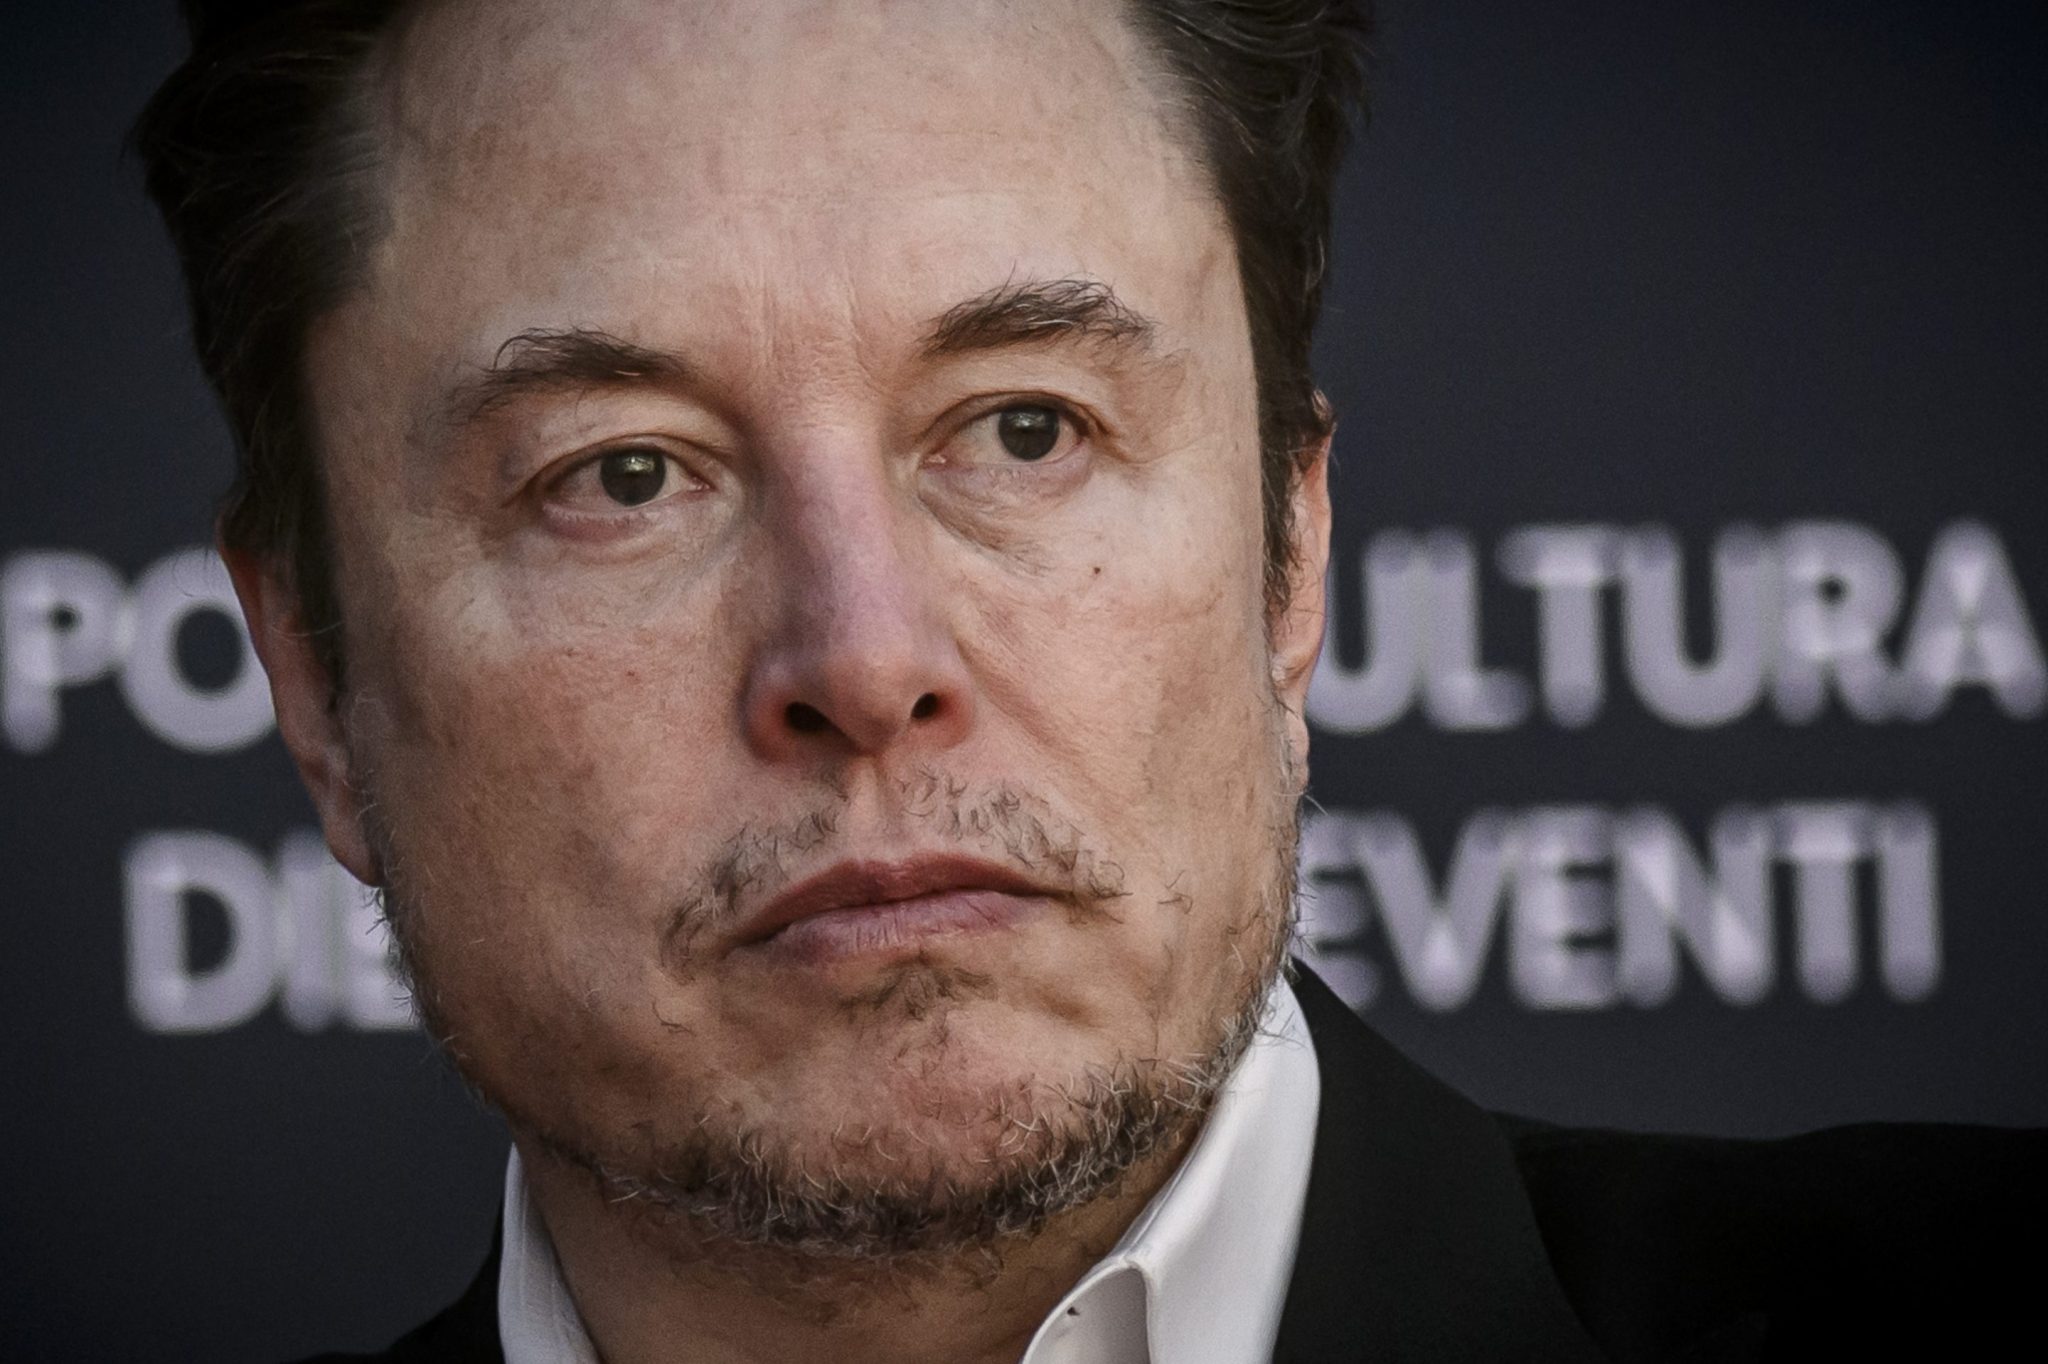 Tesla loses $82 billion in market value after Elon Musk’s warning about Chinese EVs—and the path forward is daunting